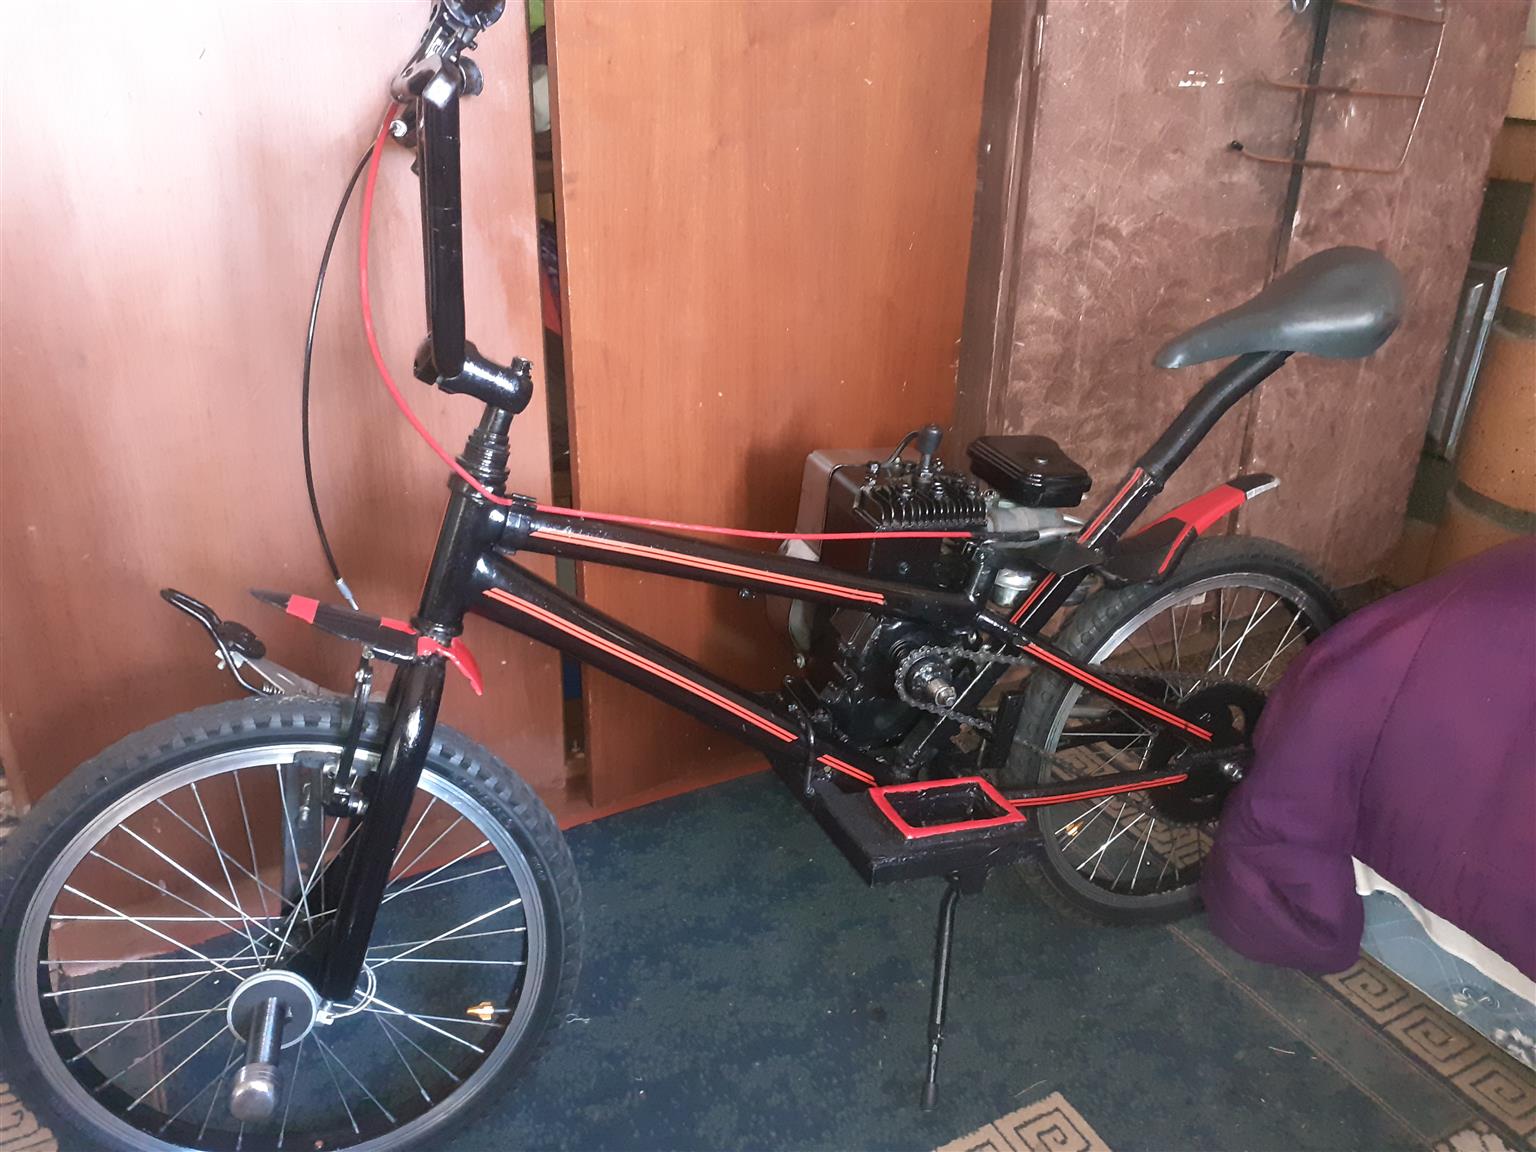 2000 bmx. Moped.   Briggs and straton classic motor.  110 cc 4 stroke.  3hp.